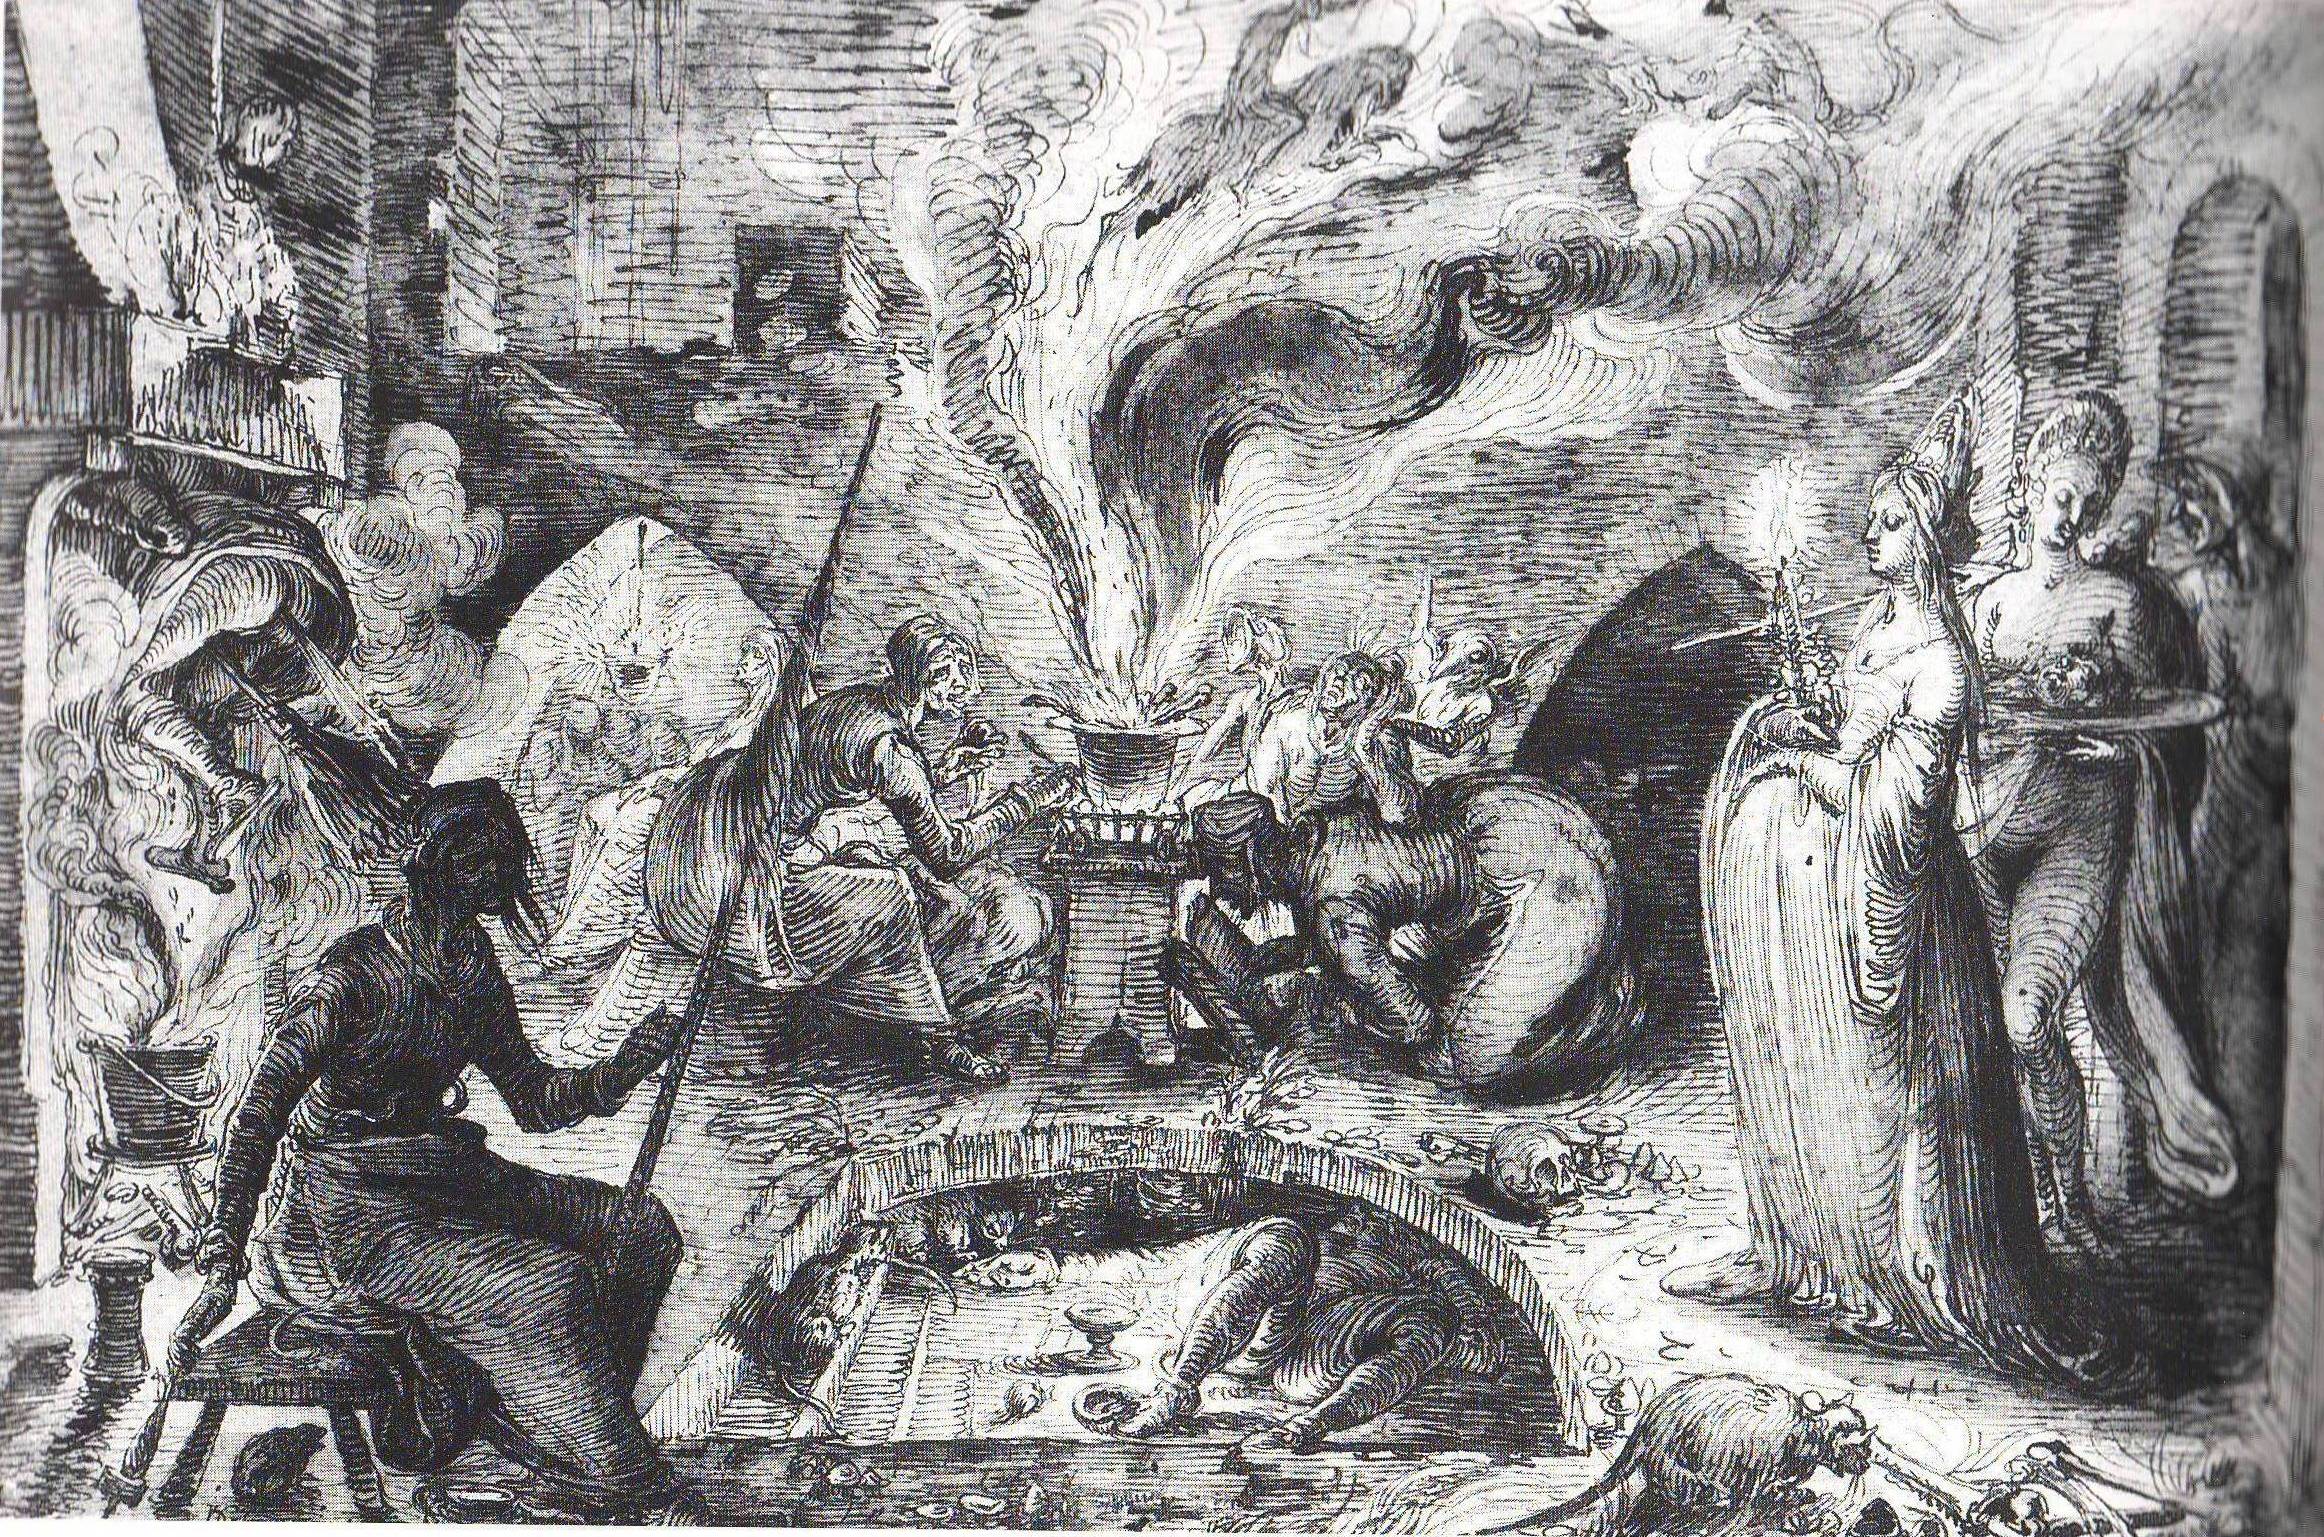 People around a cauldron spewing smoke, religious figures standing amid the chaos